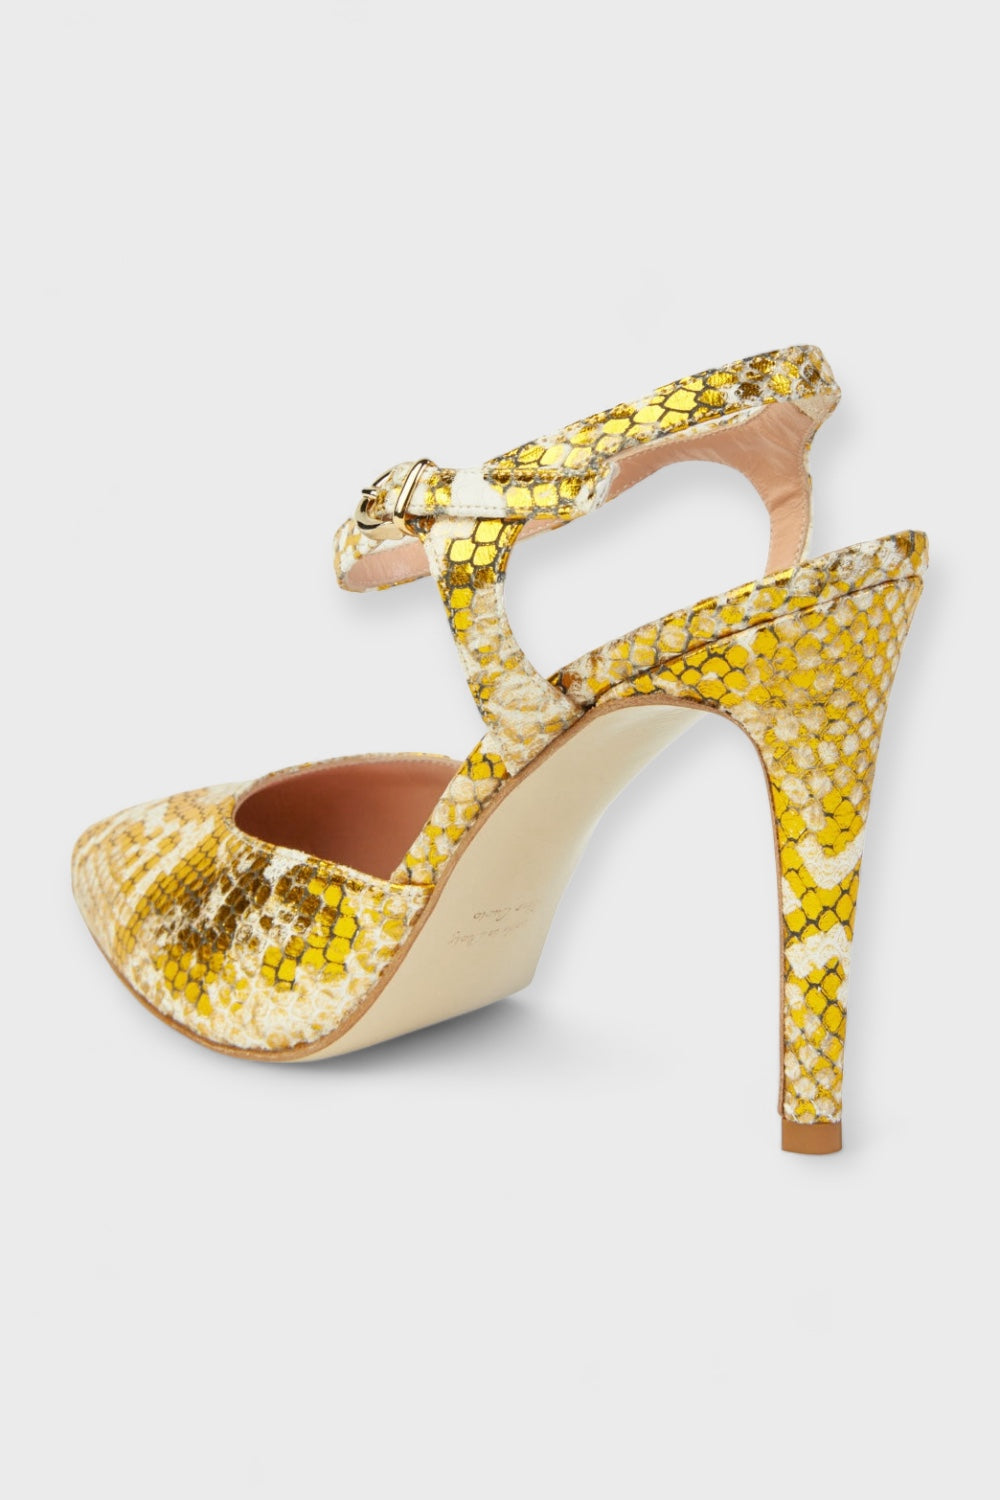 Maci Gold Python-Embossed Leather Pumps by Danilo di Lea Italian Women's Shoes